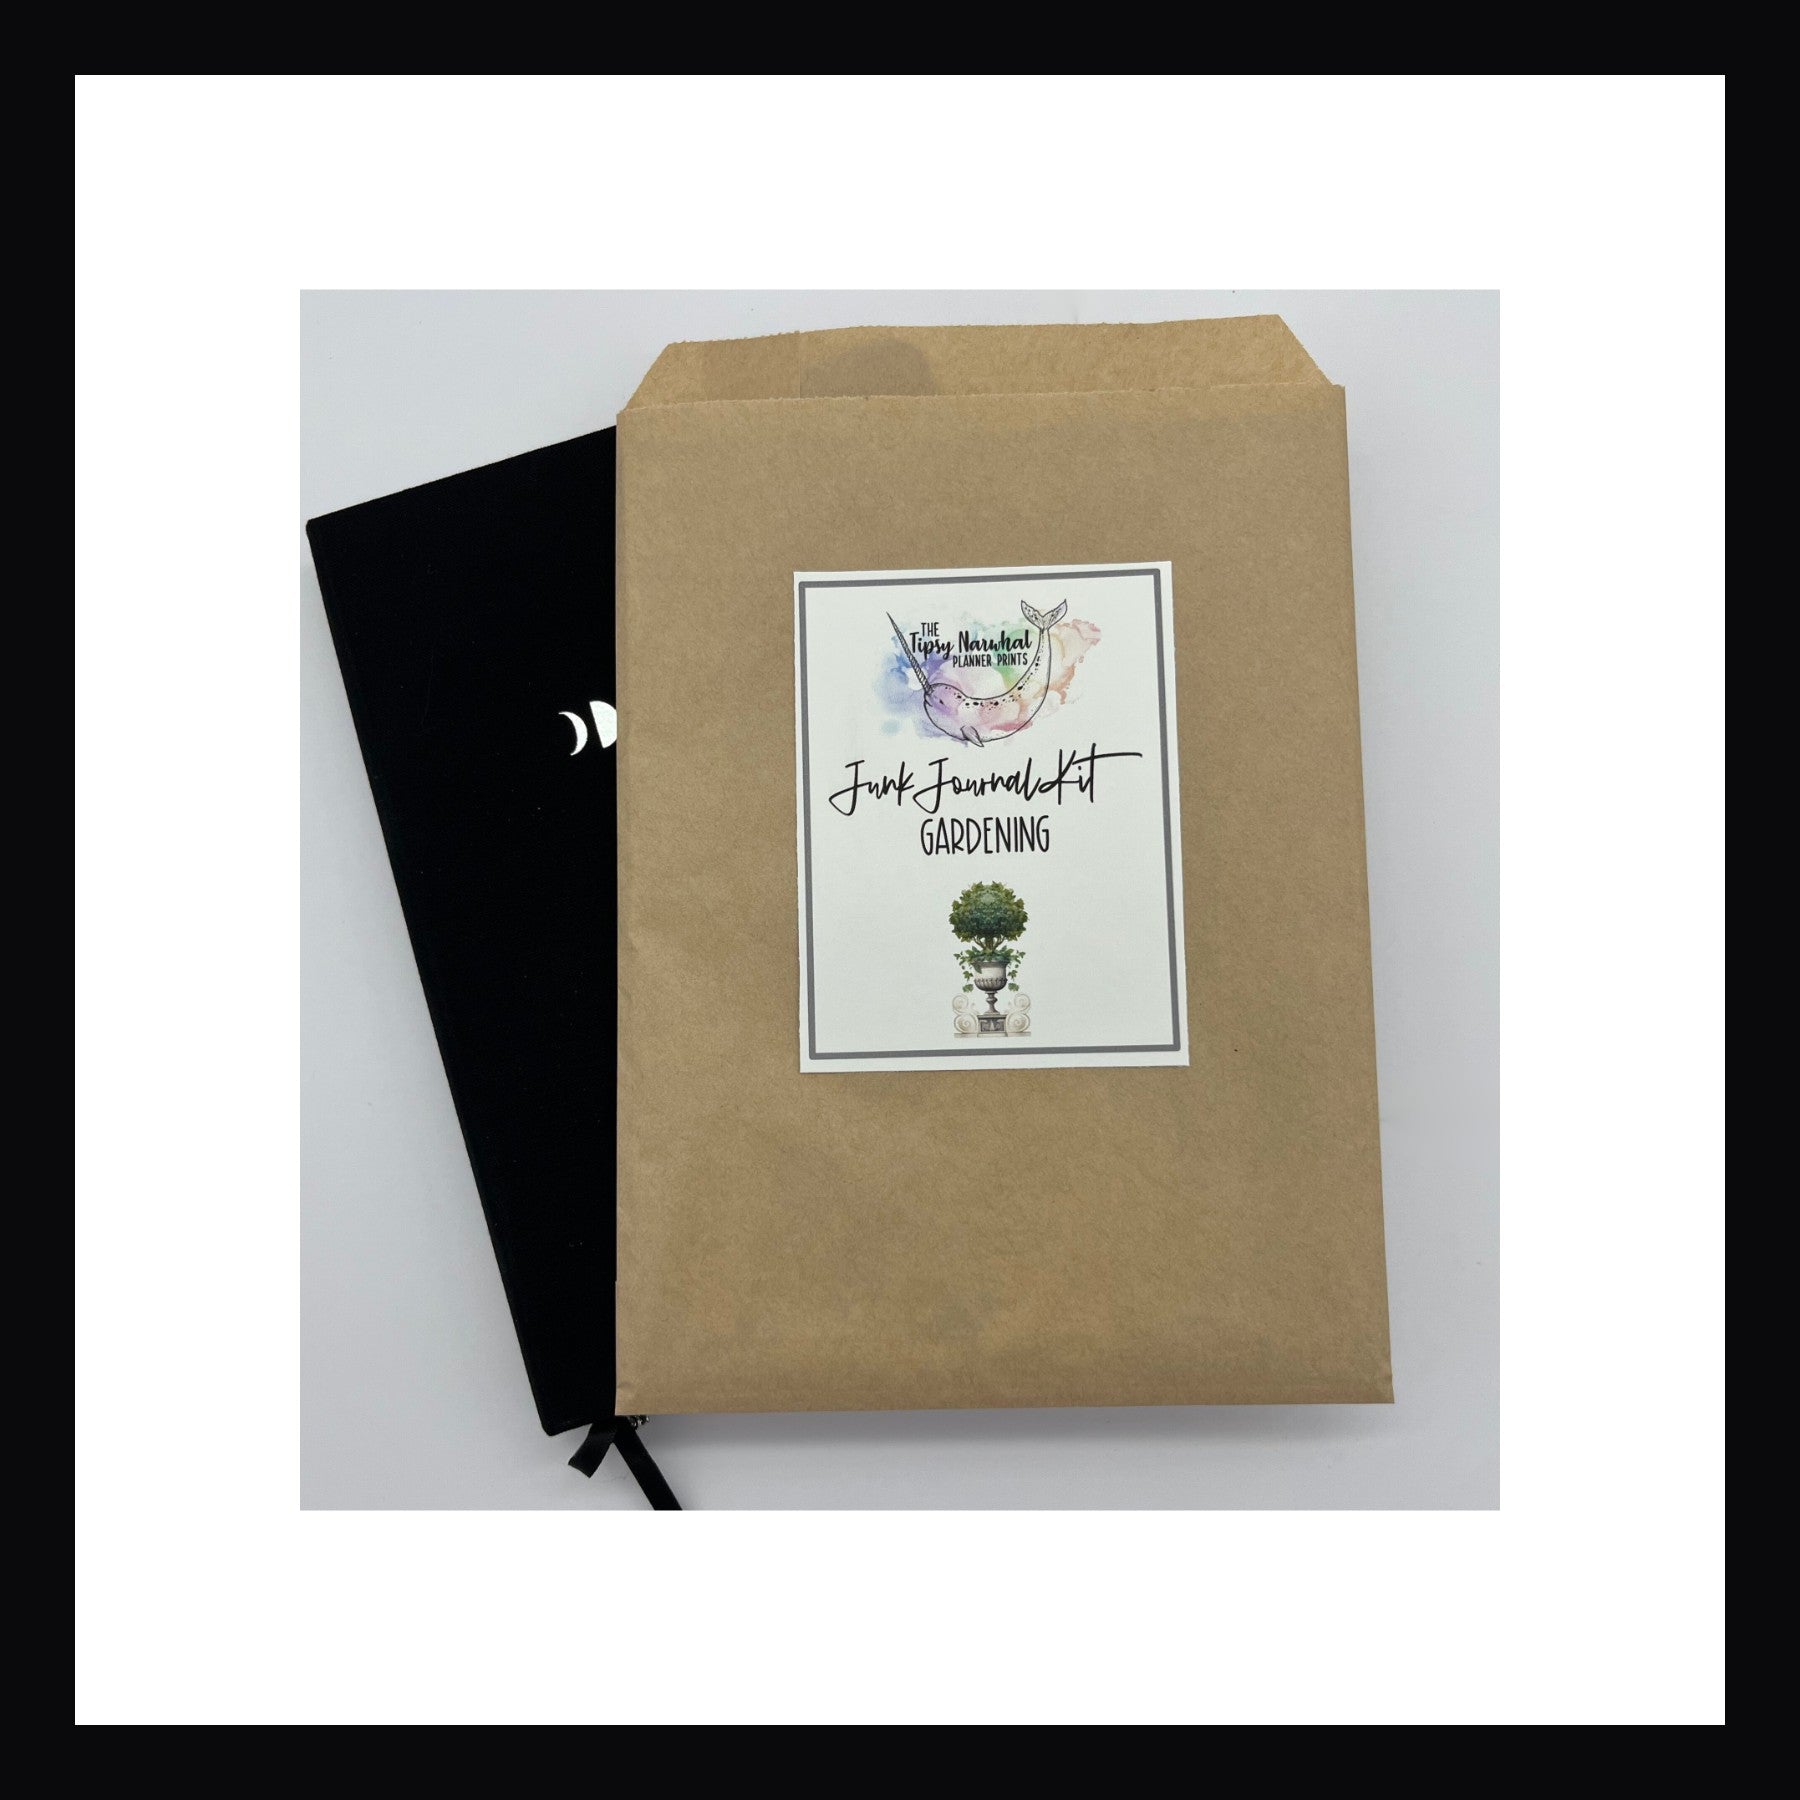 Gardening Junk Journaling Kit comes packaged in a kraft paper envelope complete with label identifying the kit theme. 